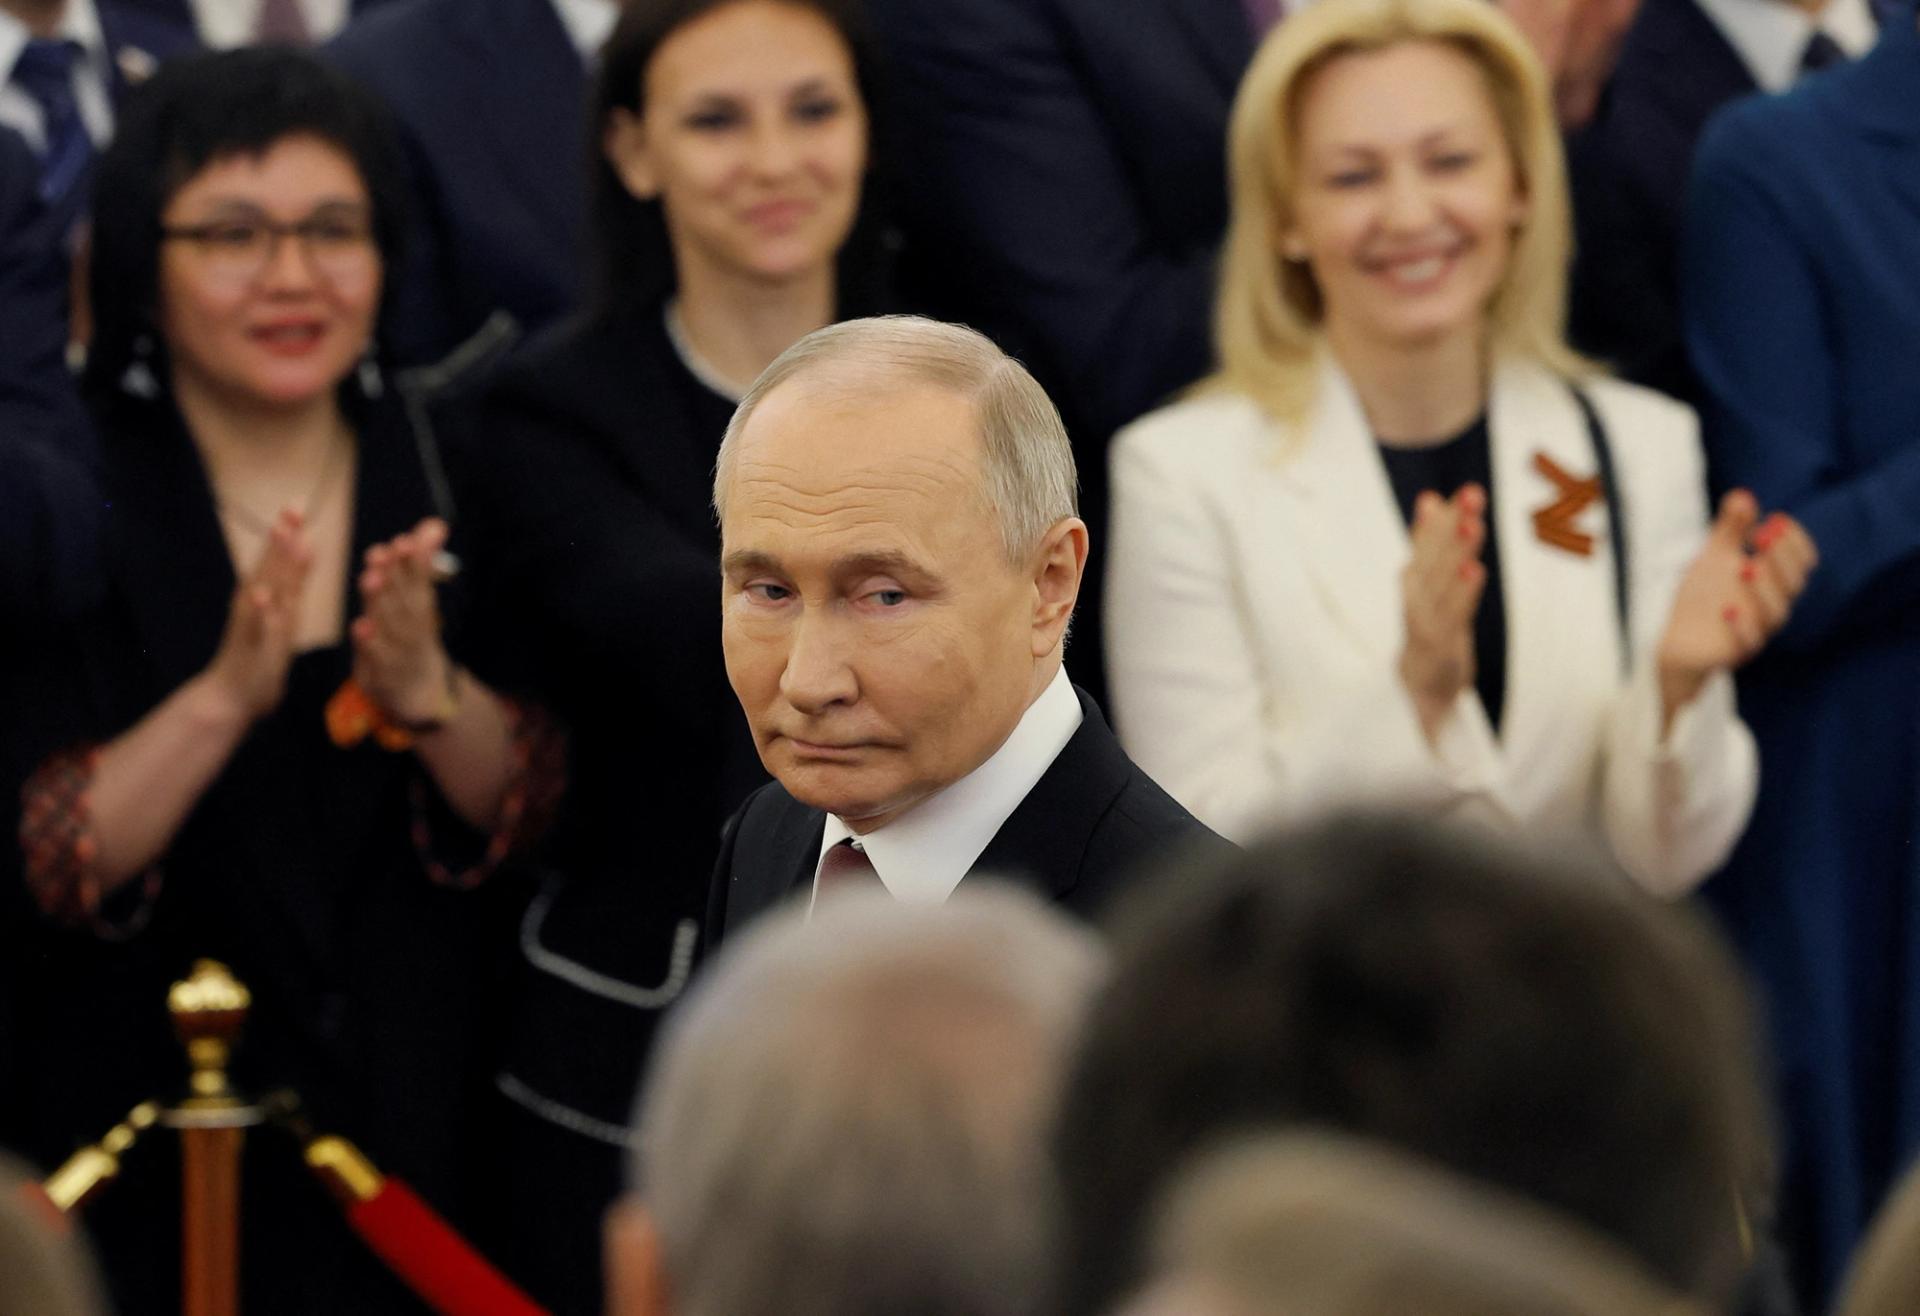 Putin sworn in for fifth term as president, tightening his grip over Russia  | Semafor